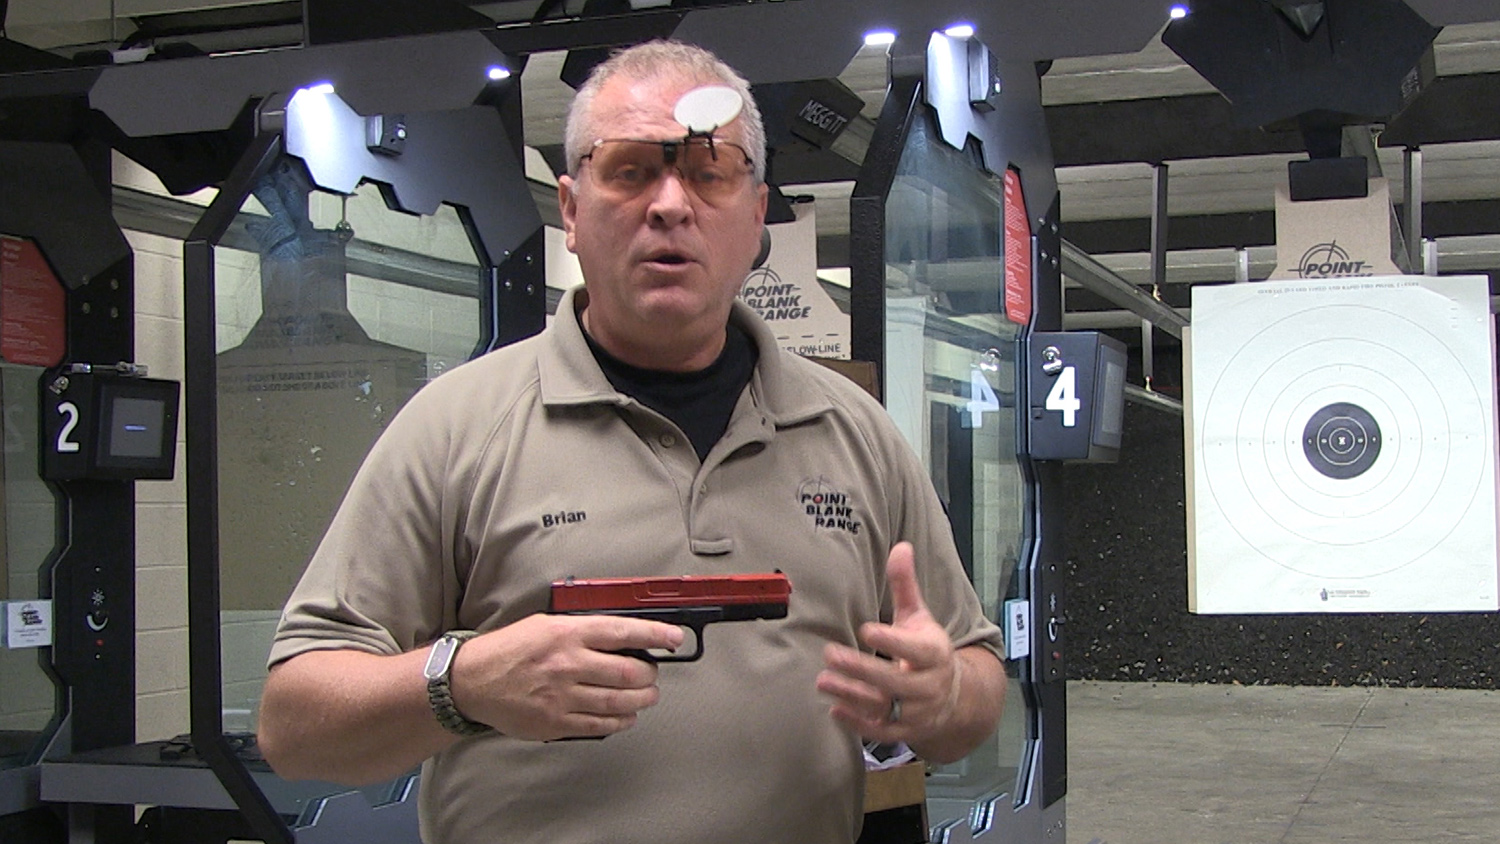 Brian Zins on how to handle anticipation in bullseye pistol competition